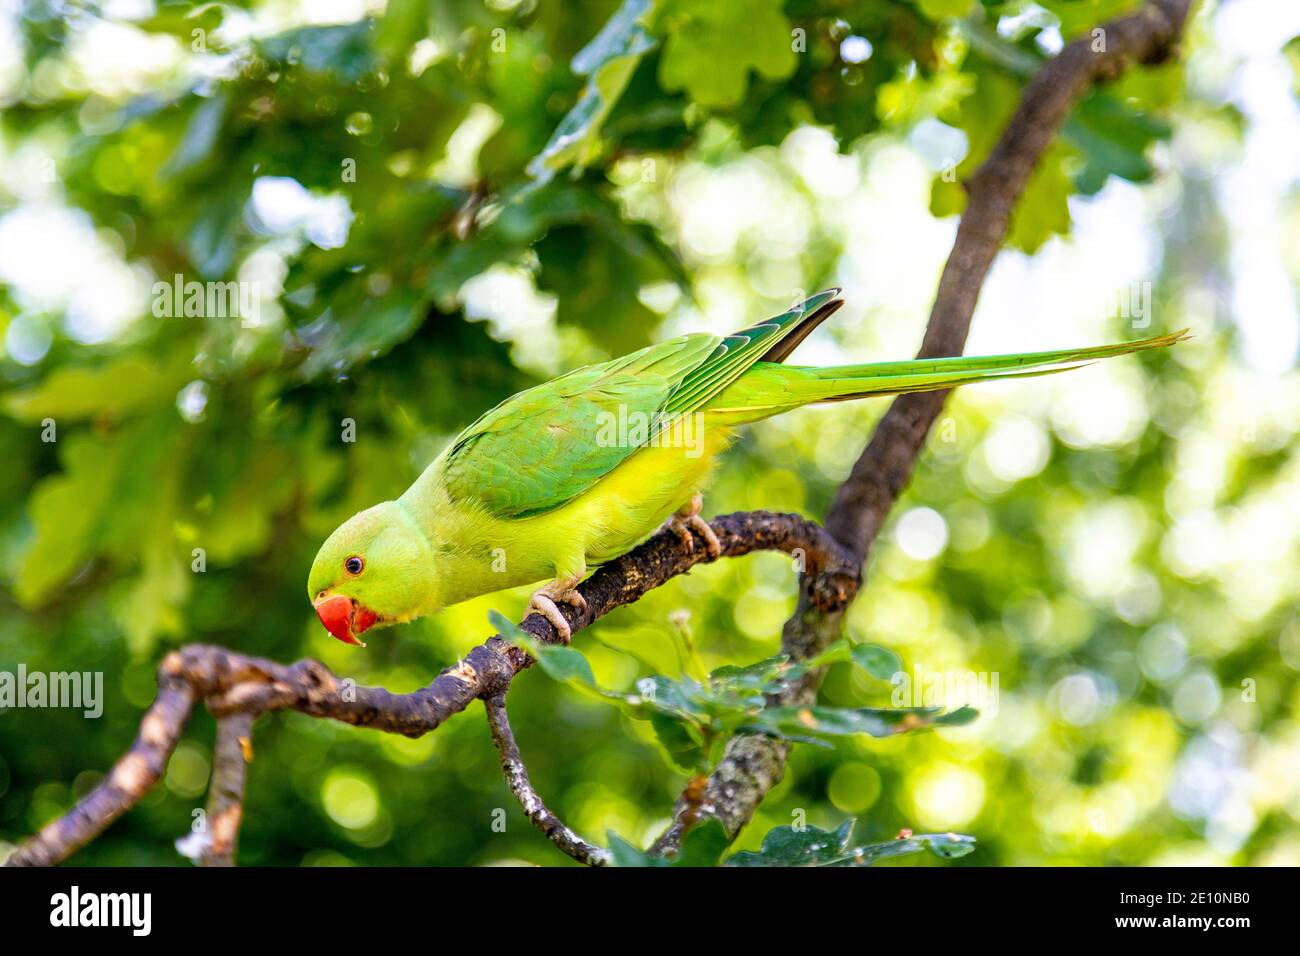 Green parakeet sitting on a branch in a tree, Hyde Park, London, UK Stock Photo